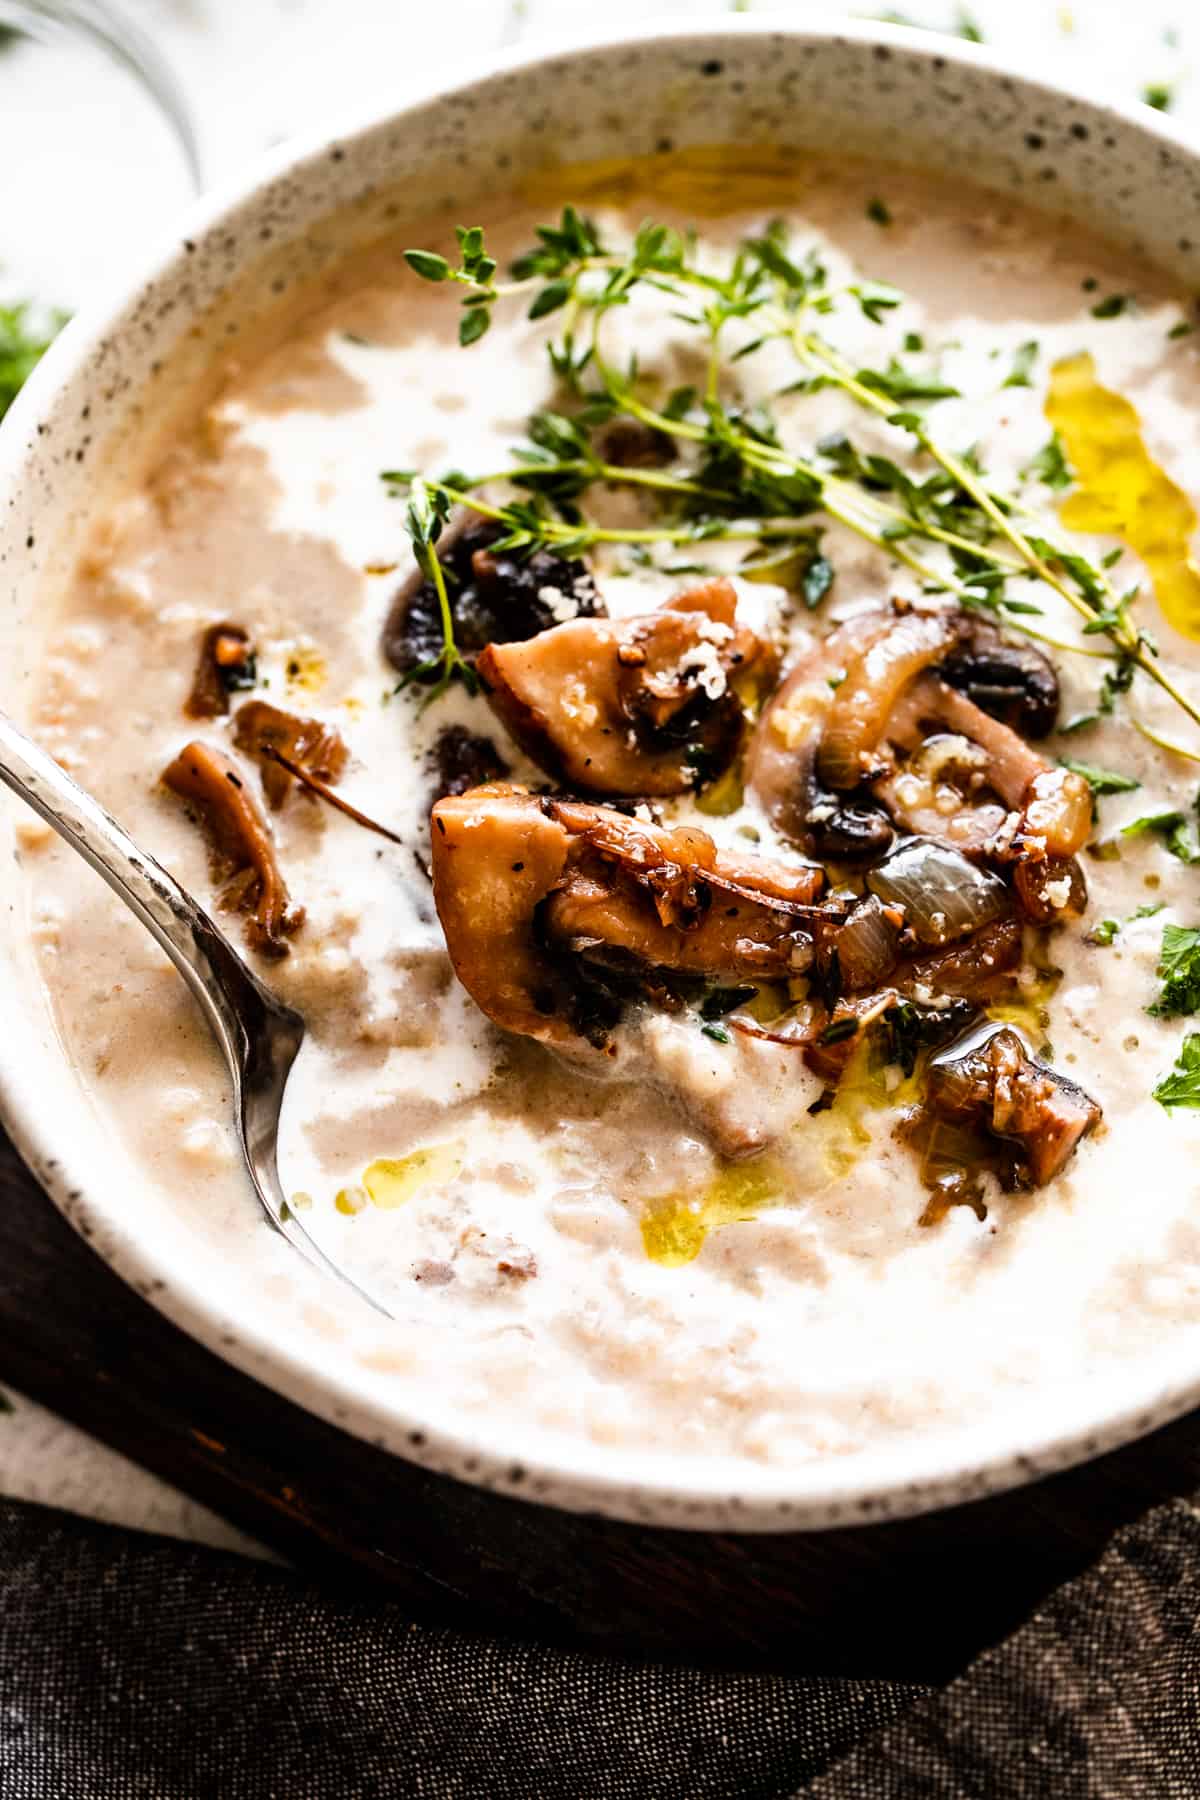 photo of a bowl with creamy mushroom soup, garnished with mushrooms, greens, and a swirl of heavy cream.